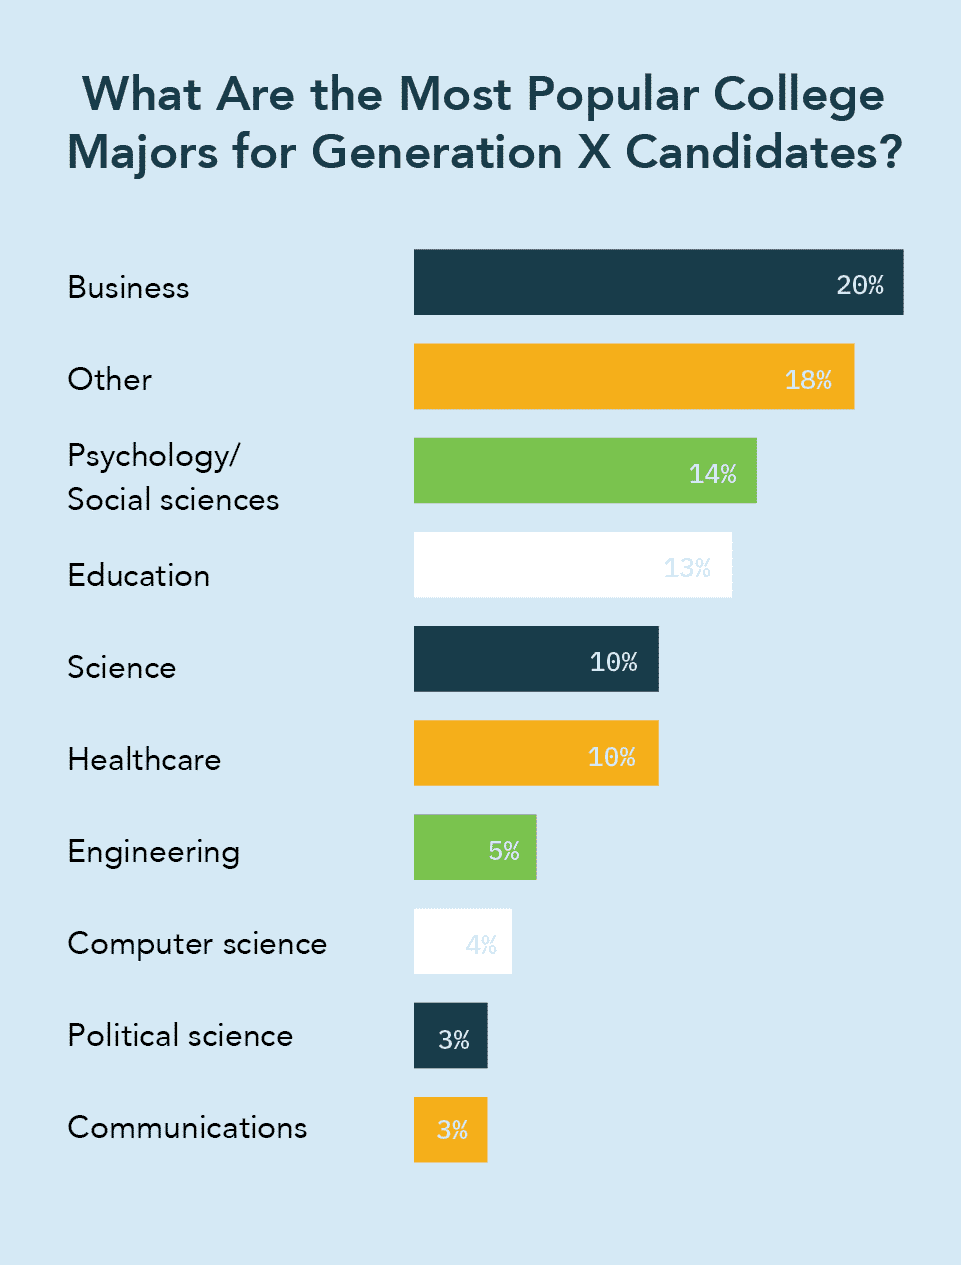 A graph depicting what the most popular college majors are for Gen X candidates.